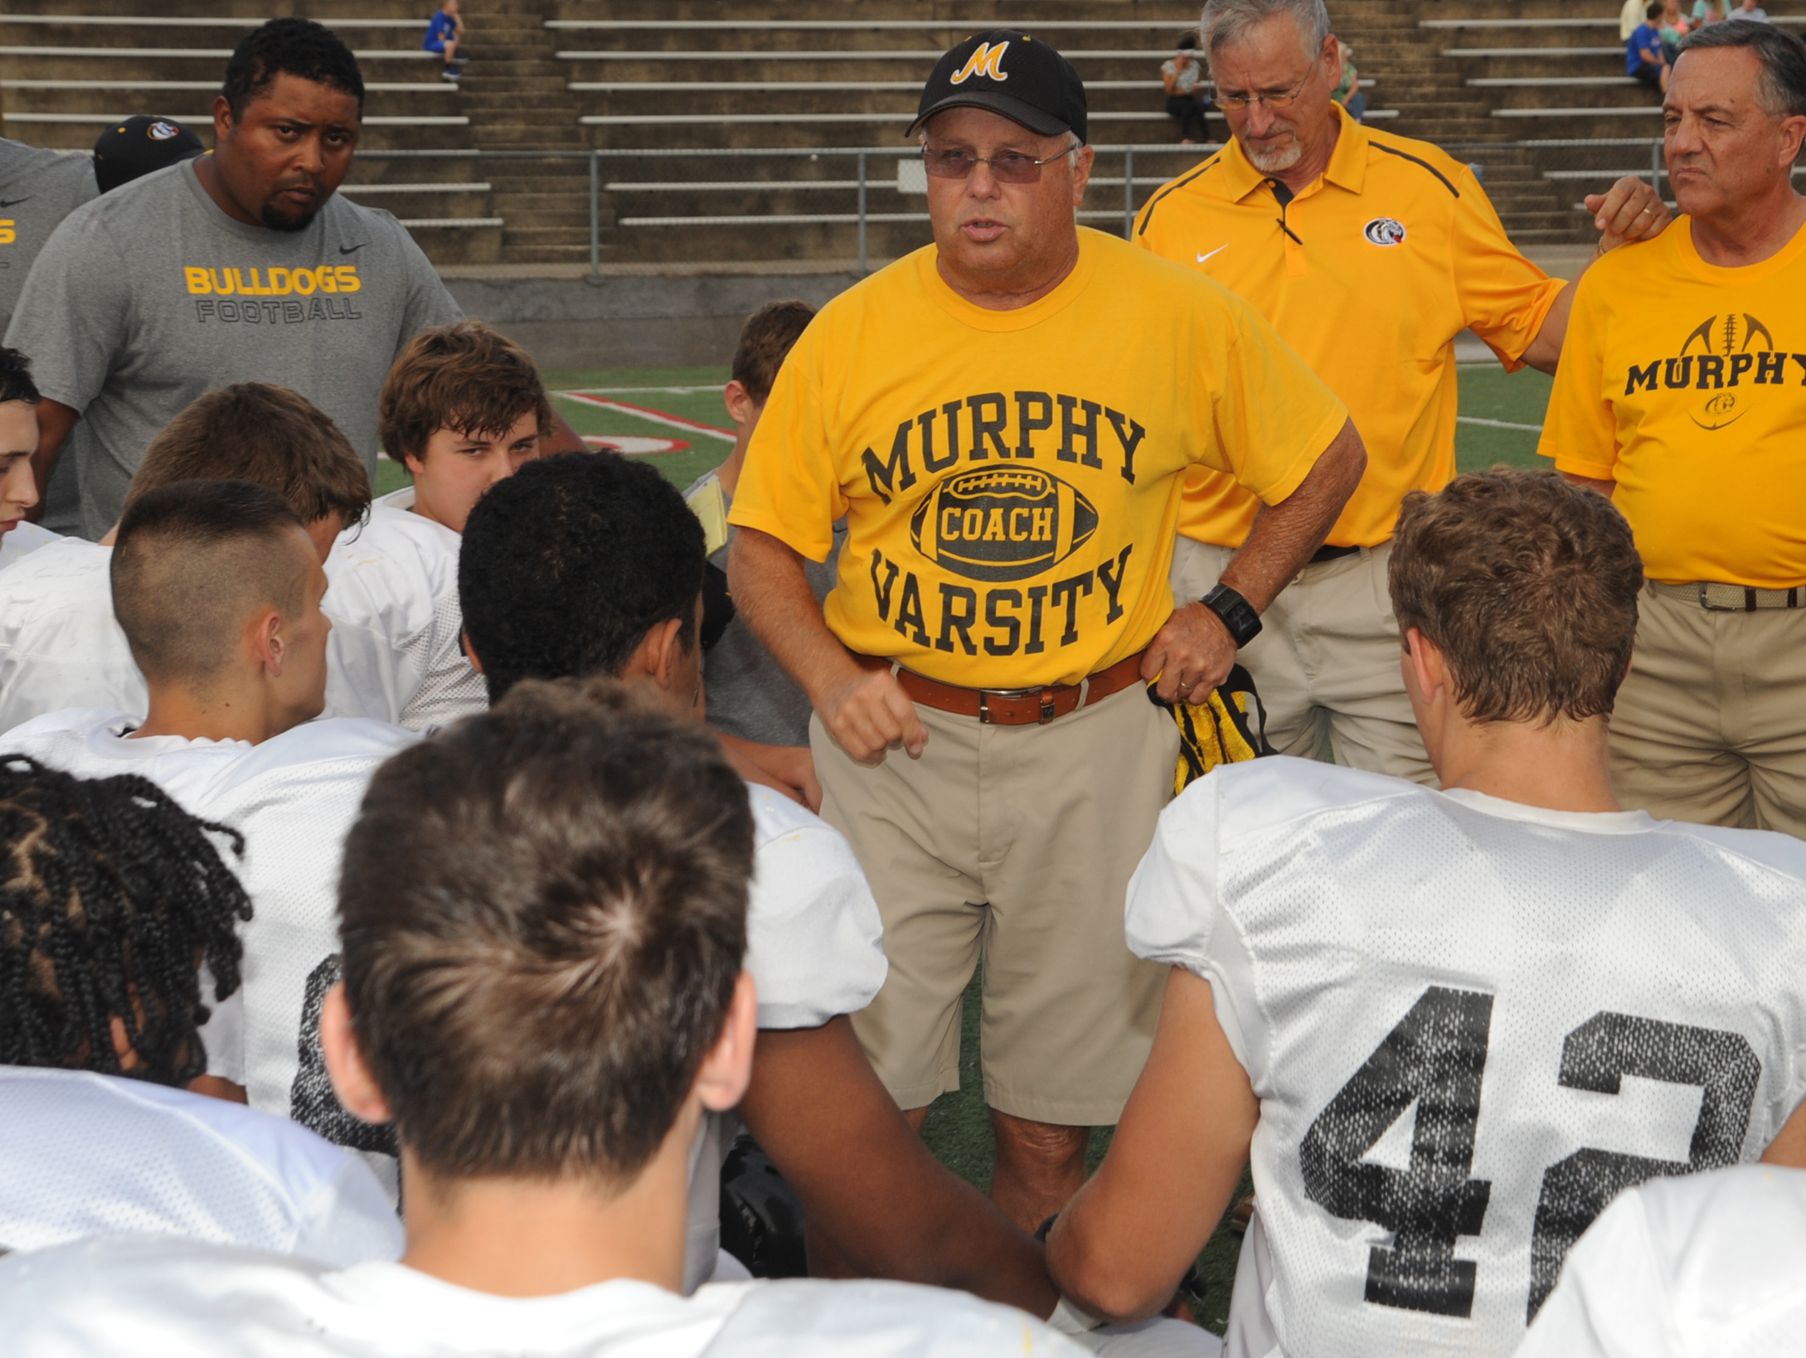 Murphy's David Gentry is the North Carolina head coach for this year's Shrine Bowl.